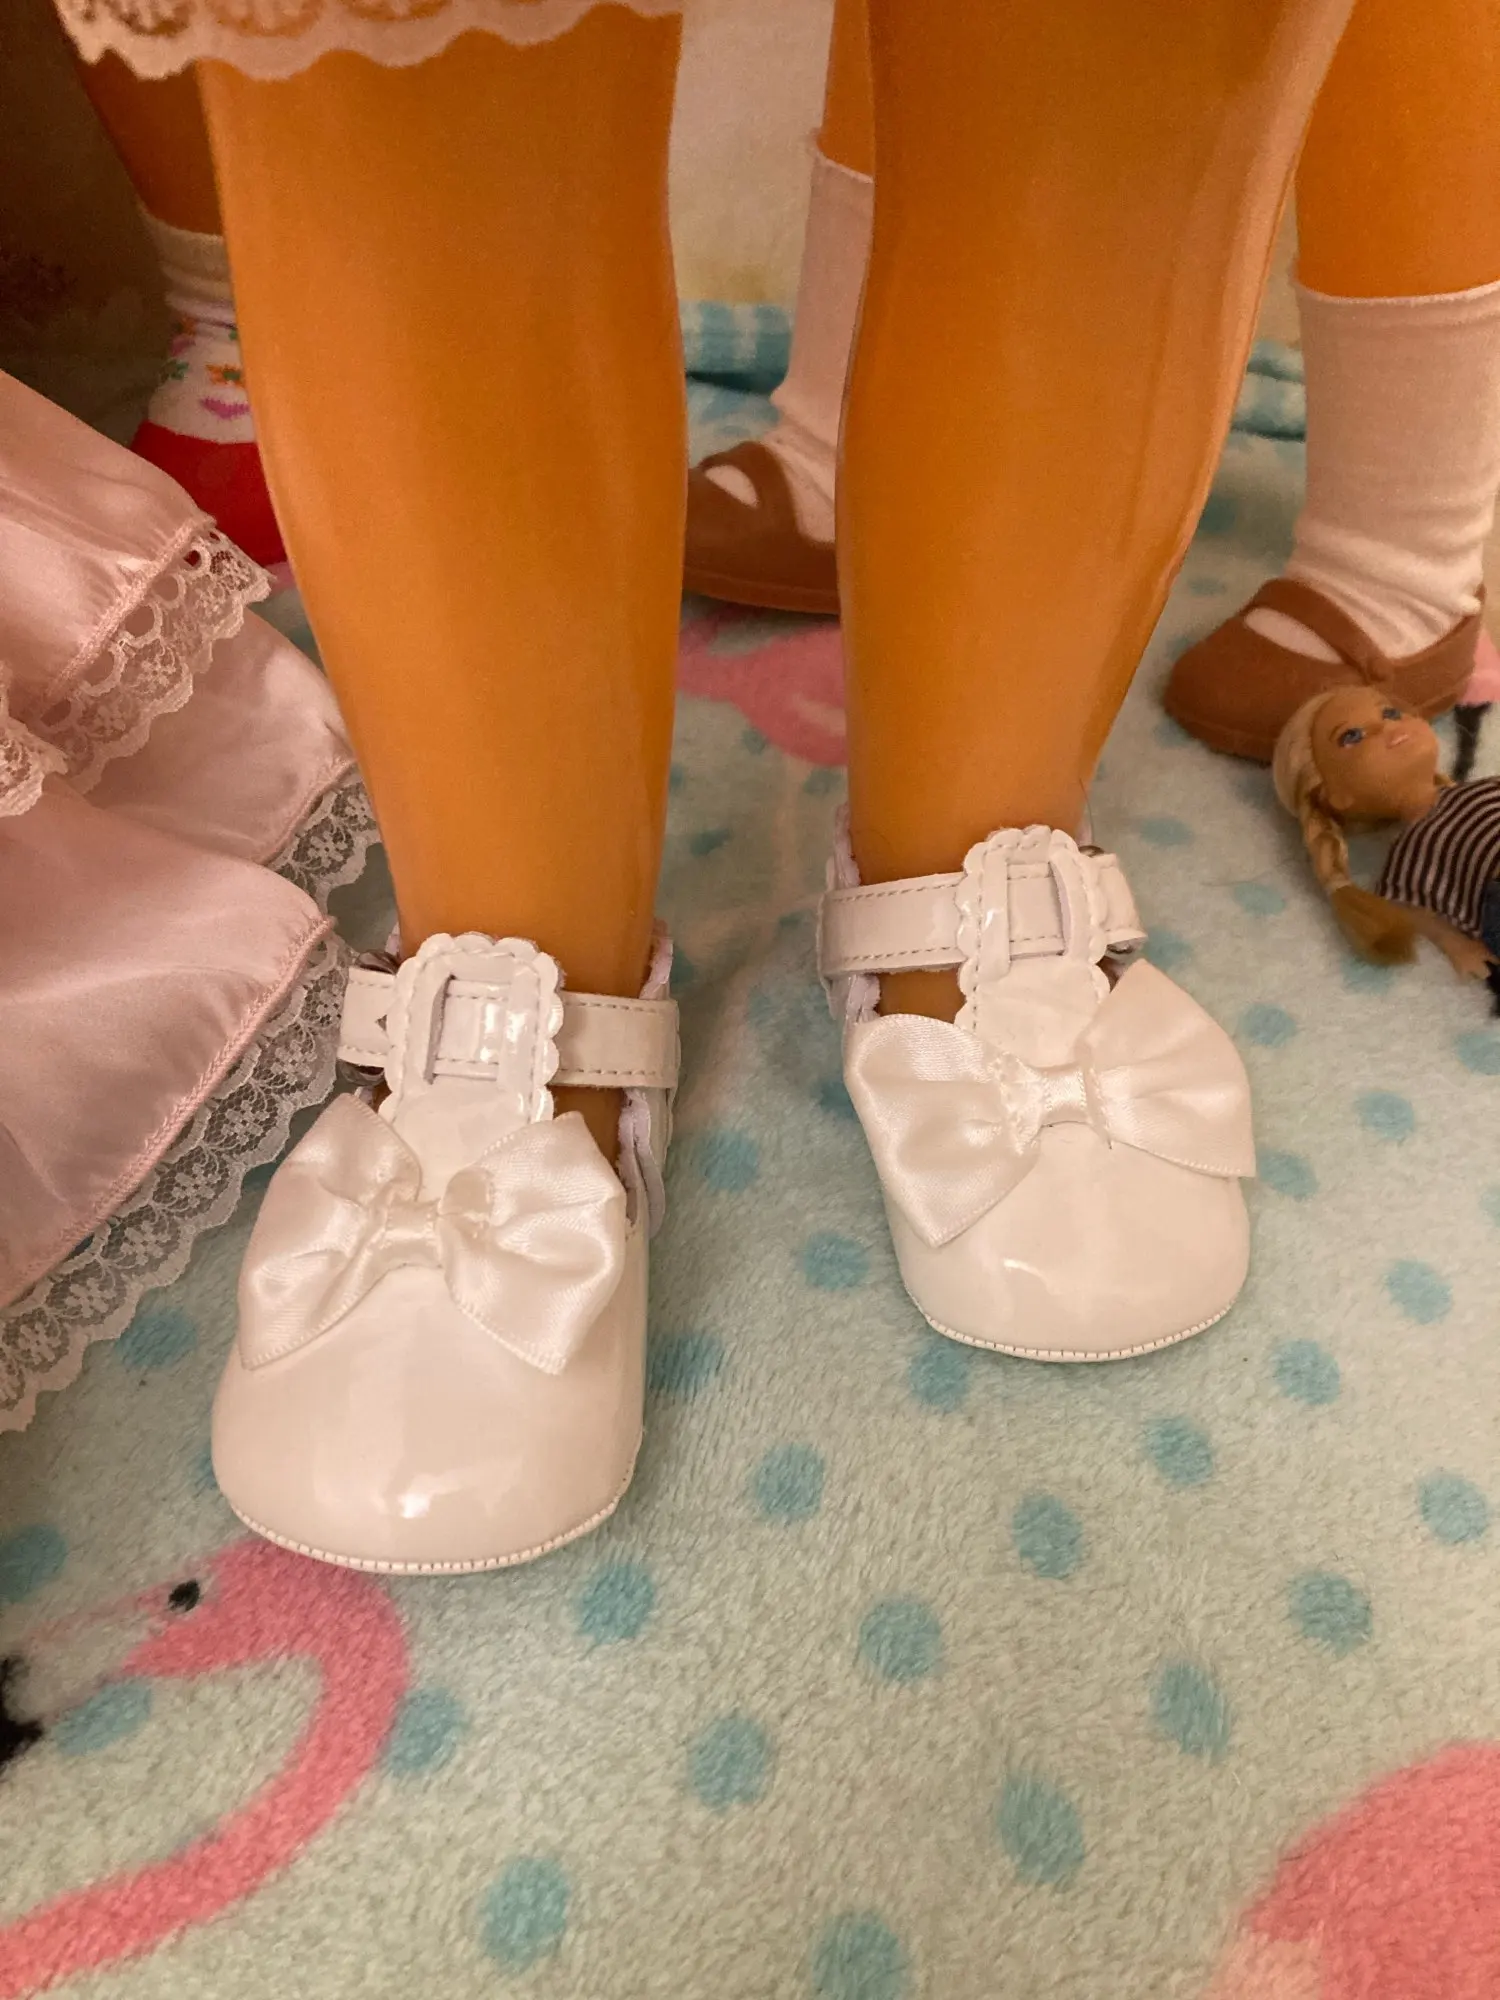 Newborn Baby Shoes Baby Boy Girl Shoes Girl Classic Bowknot Rubber Sole Anti-slip PU Dress Shoes First Walker Toddler Crib Shoes photo review